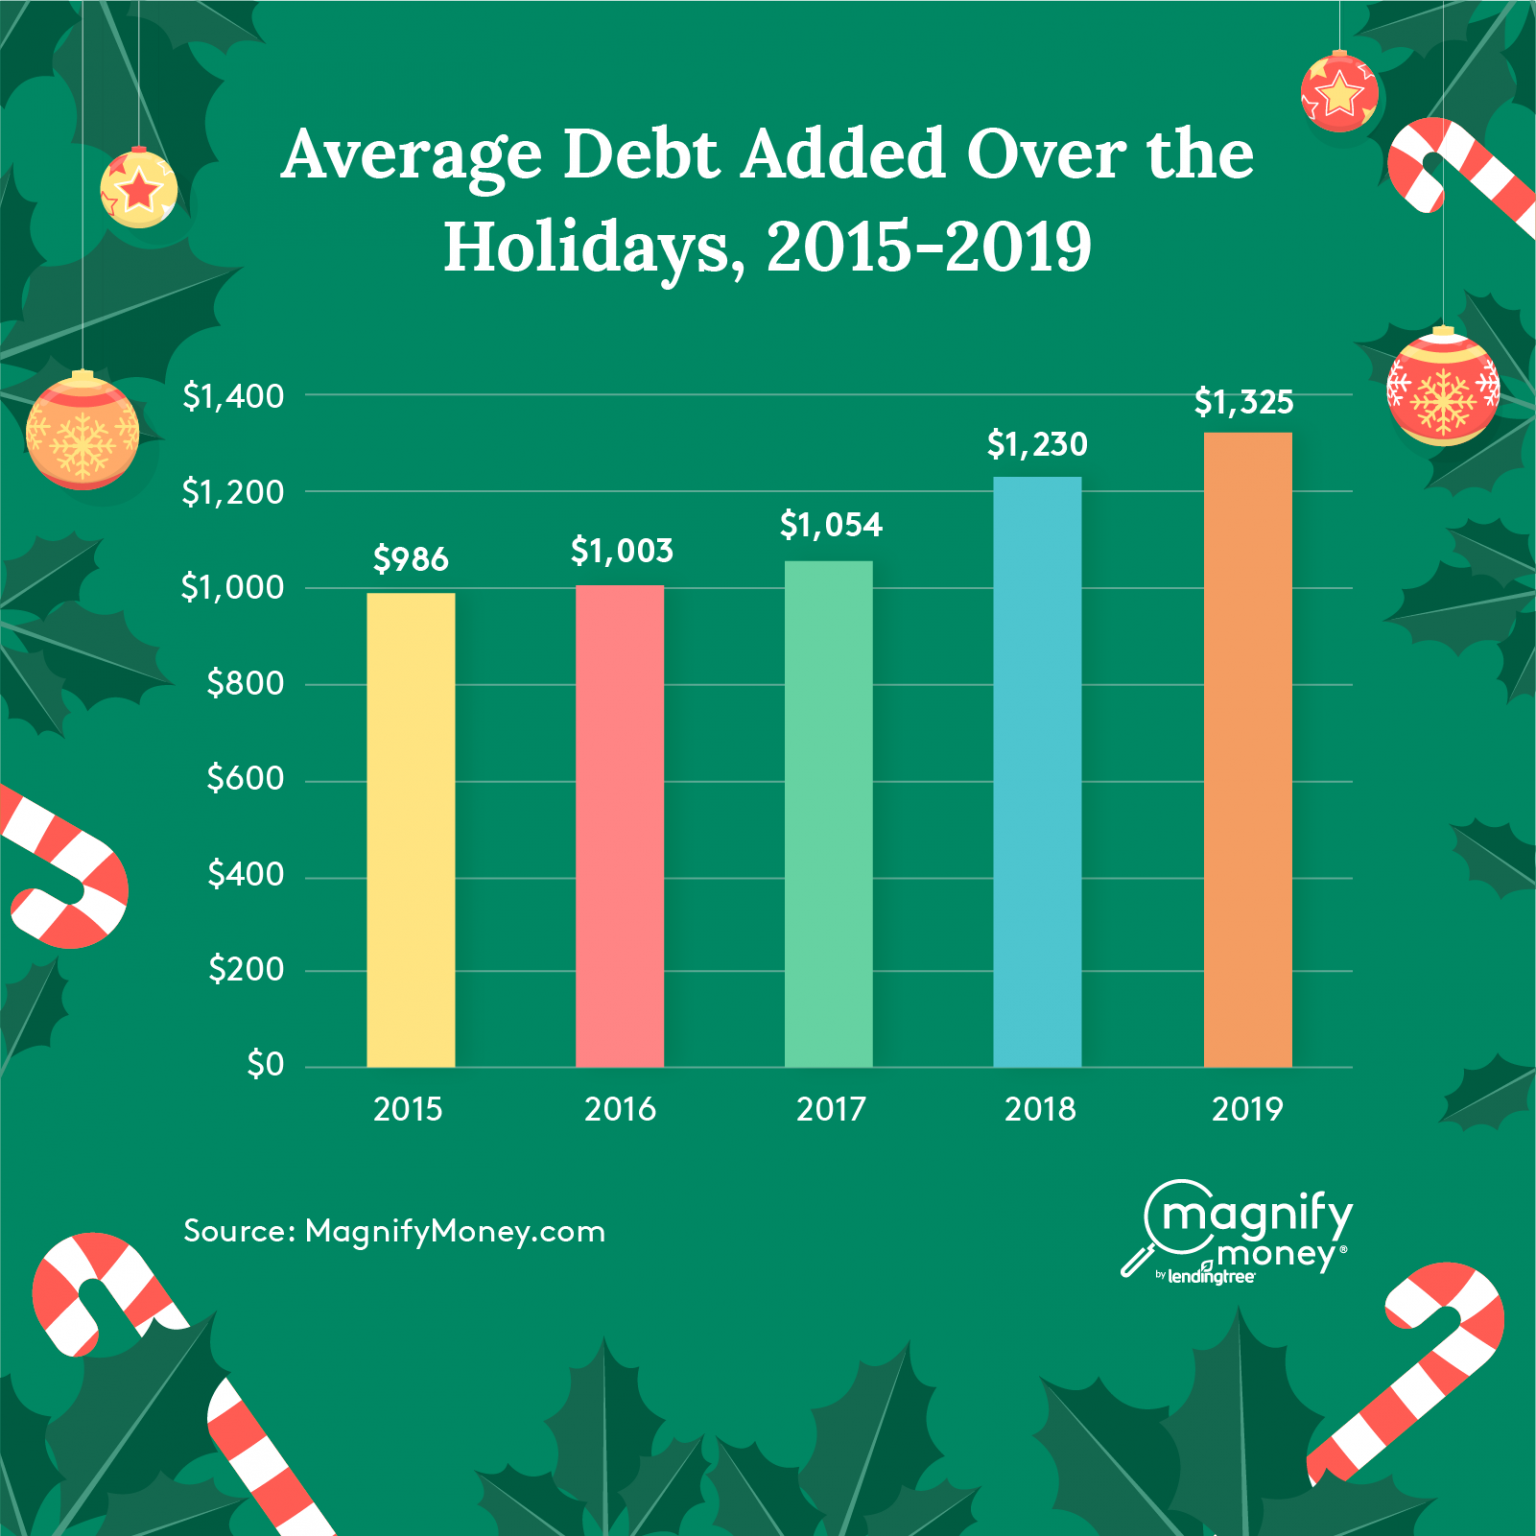 44% of consumers added $1325 each on average during 2019 holiday shopping